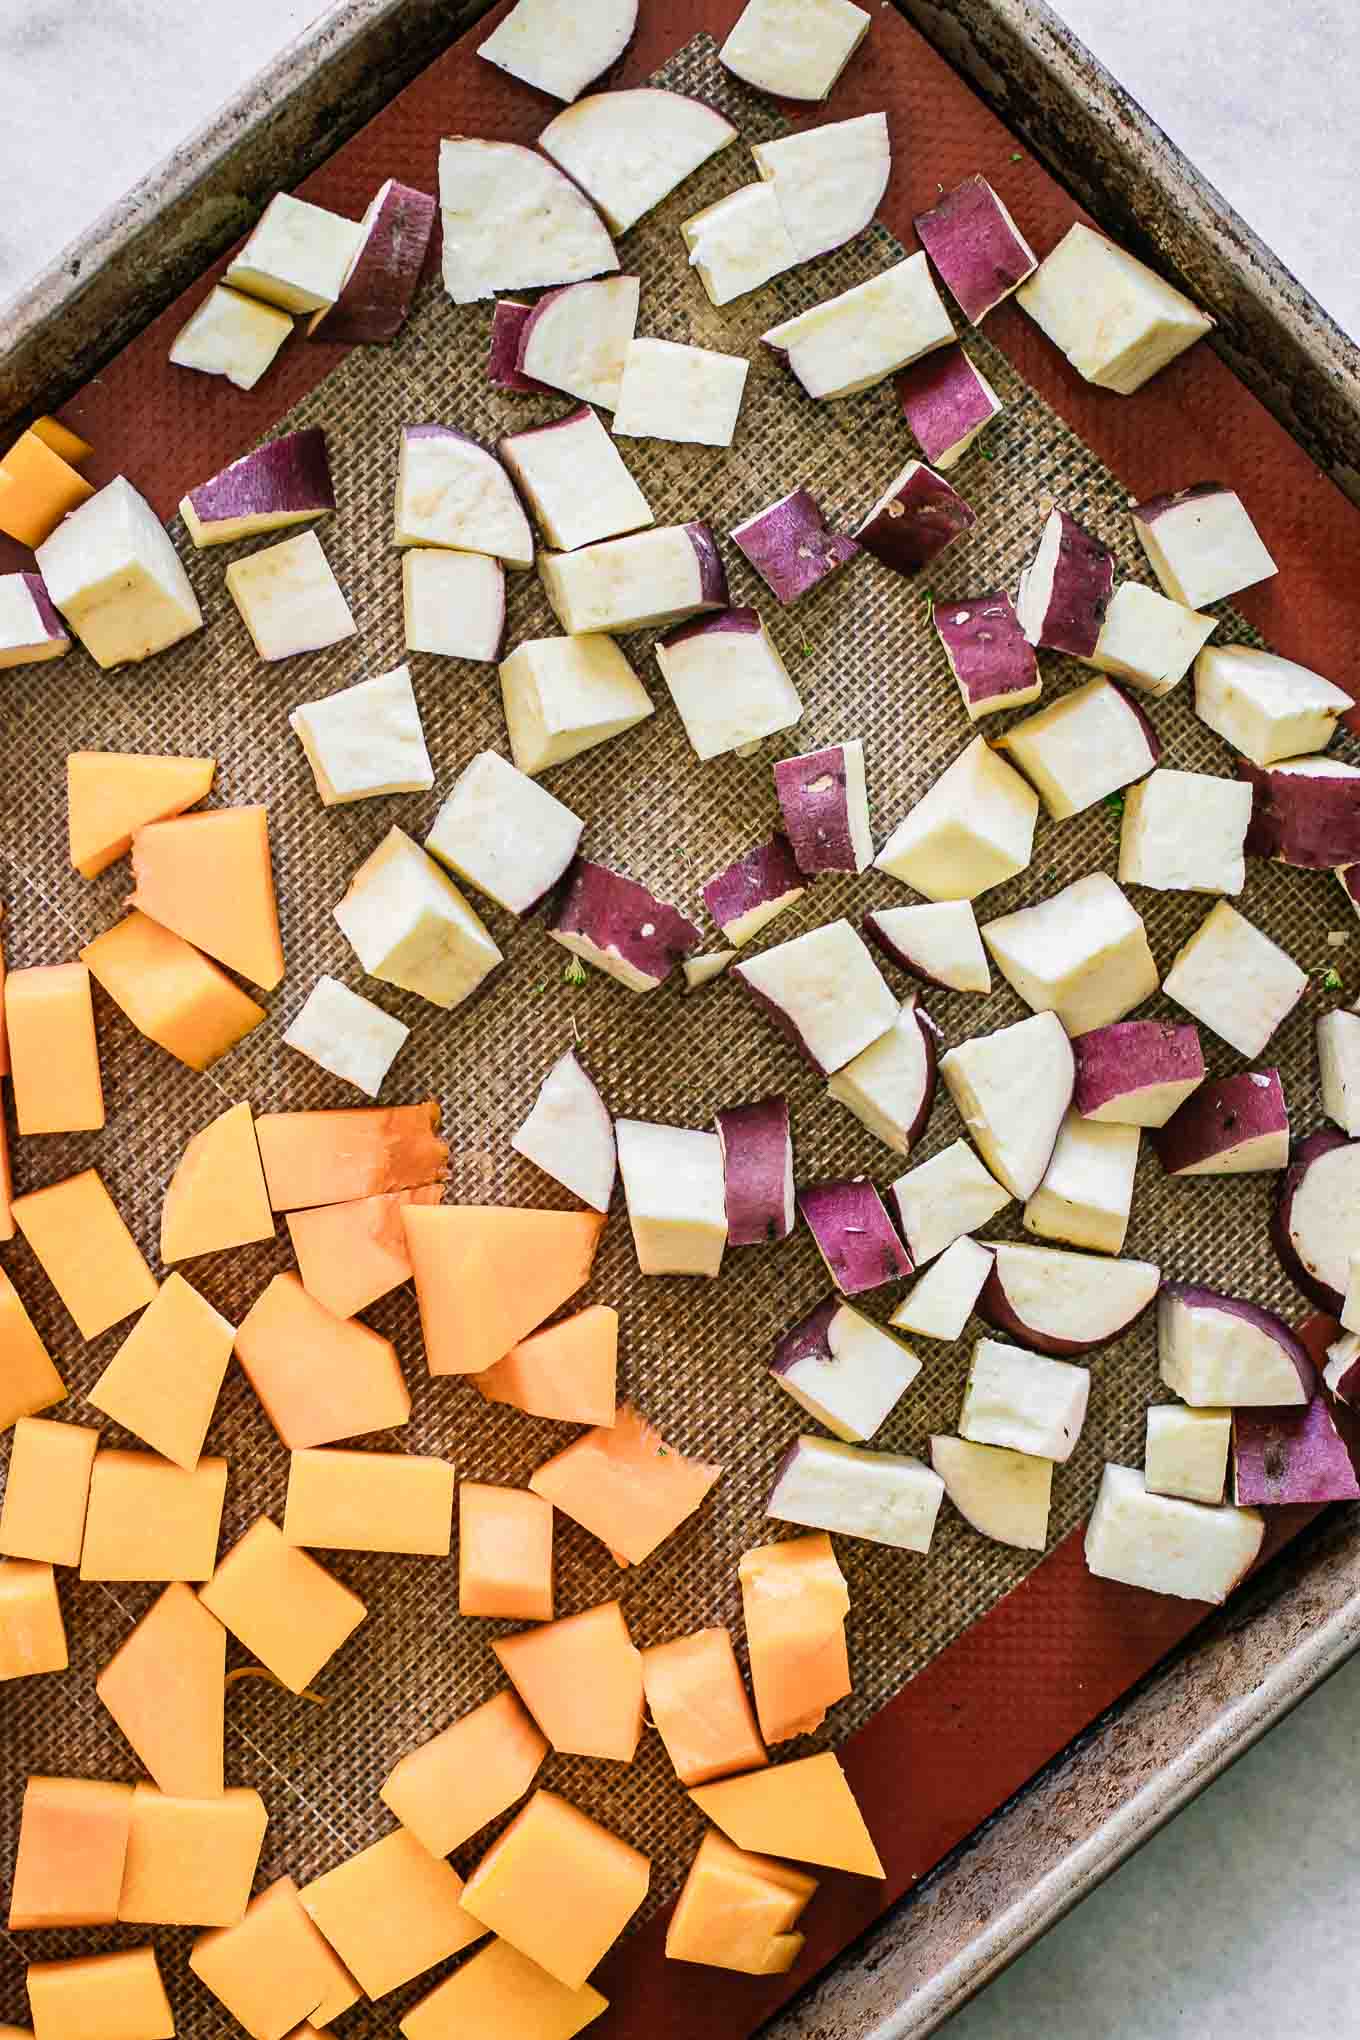 Sweet potatoes and butternut squash on a baking sheet before roasting